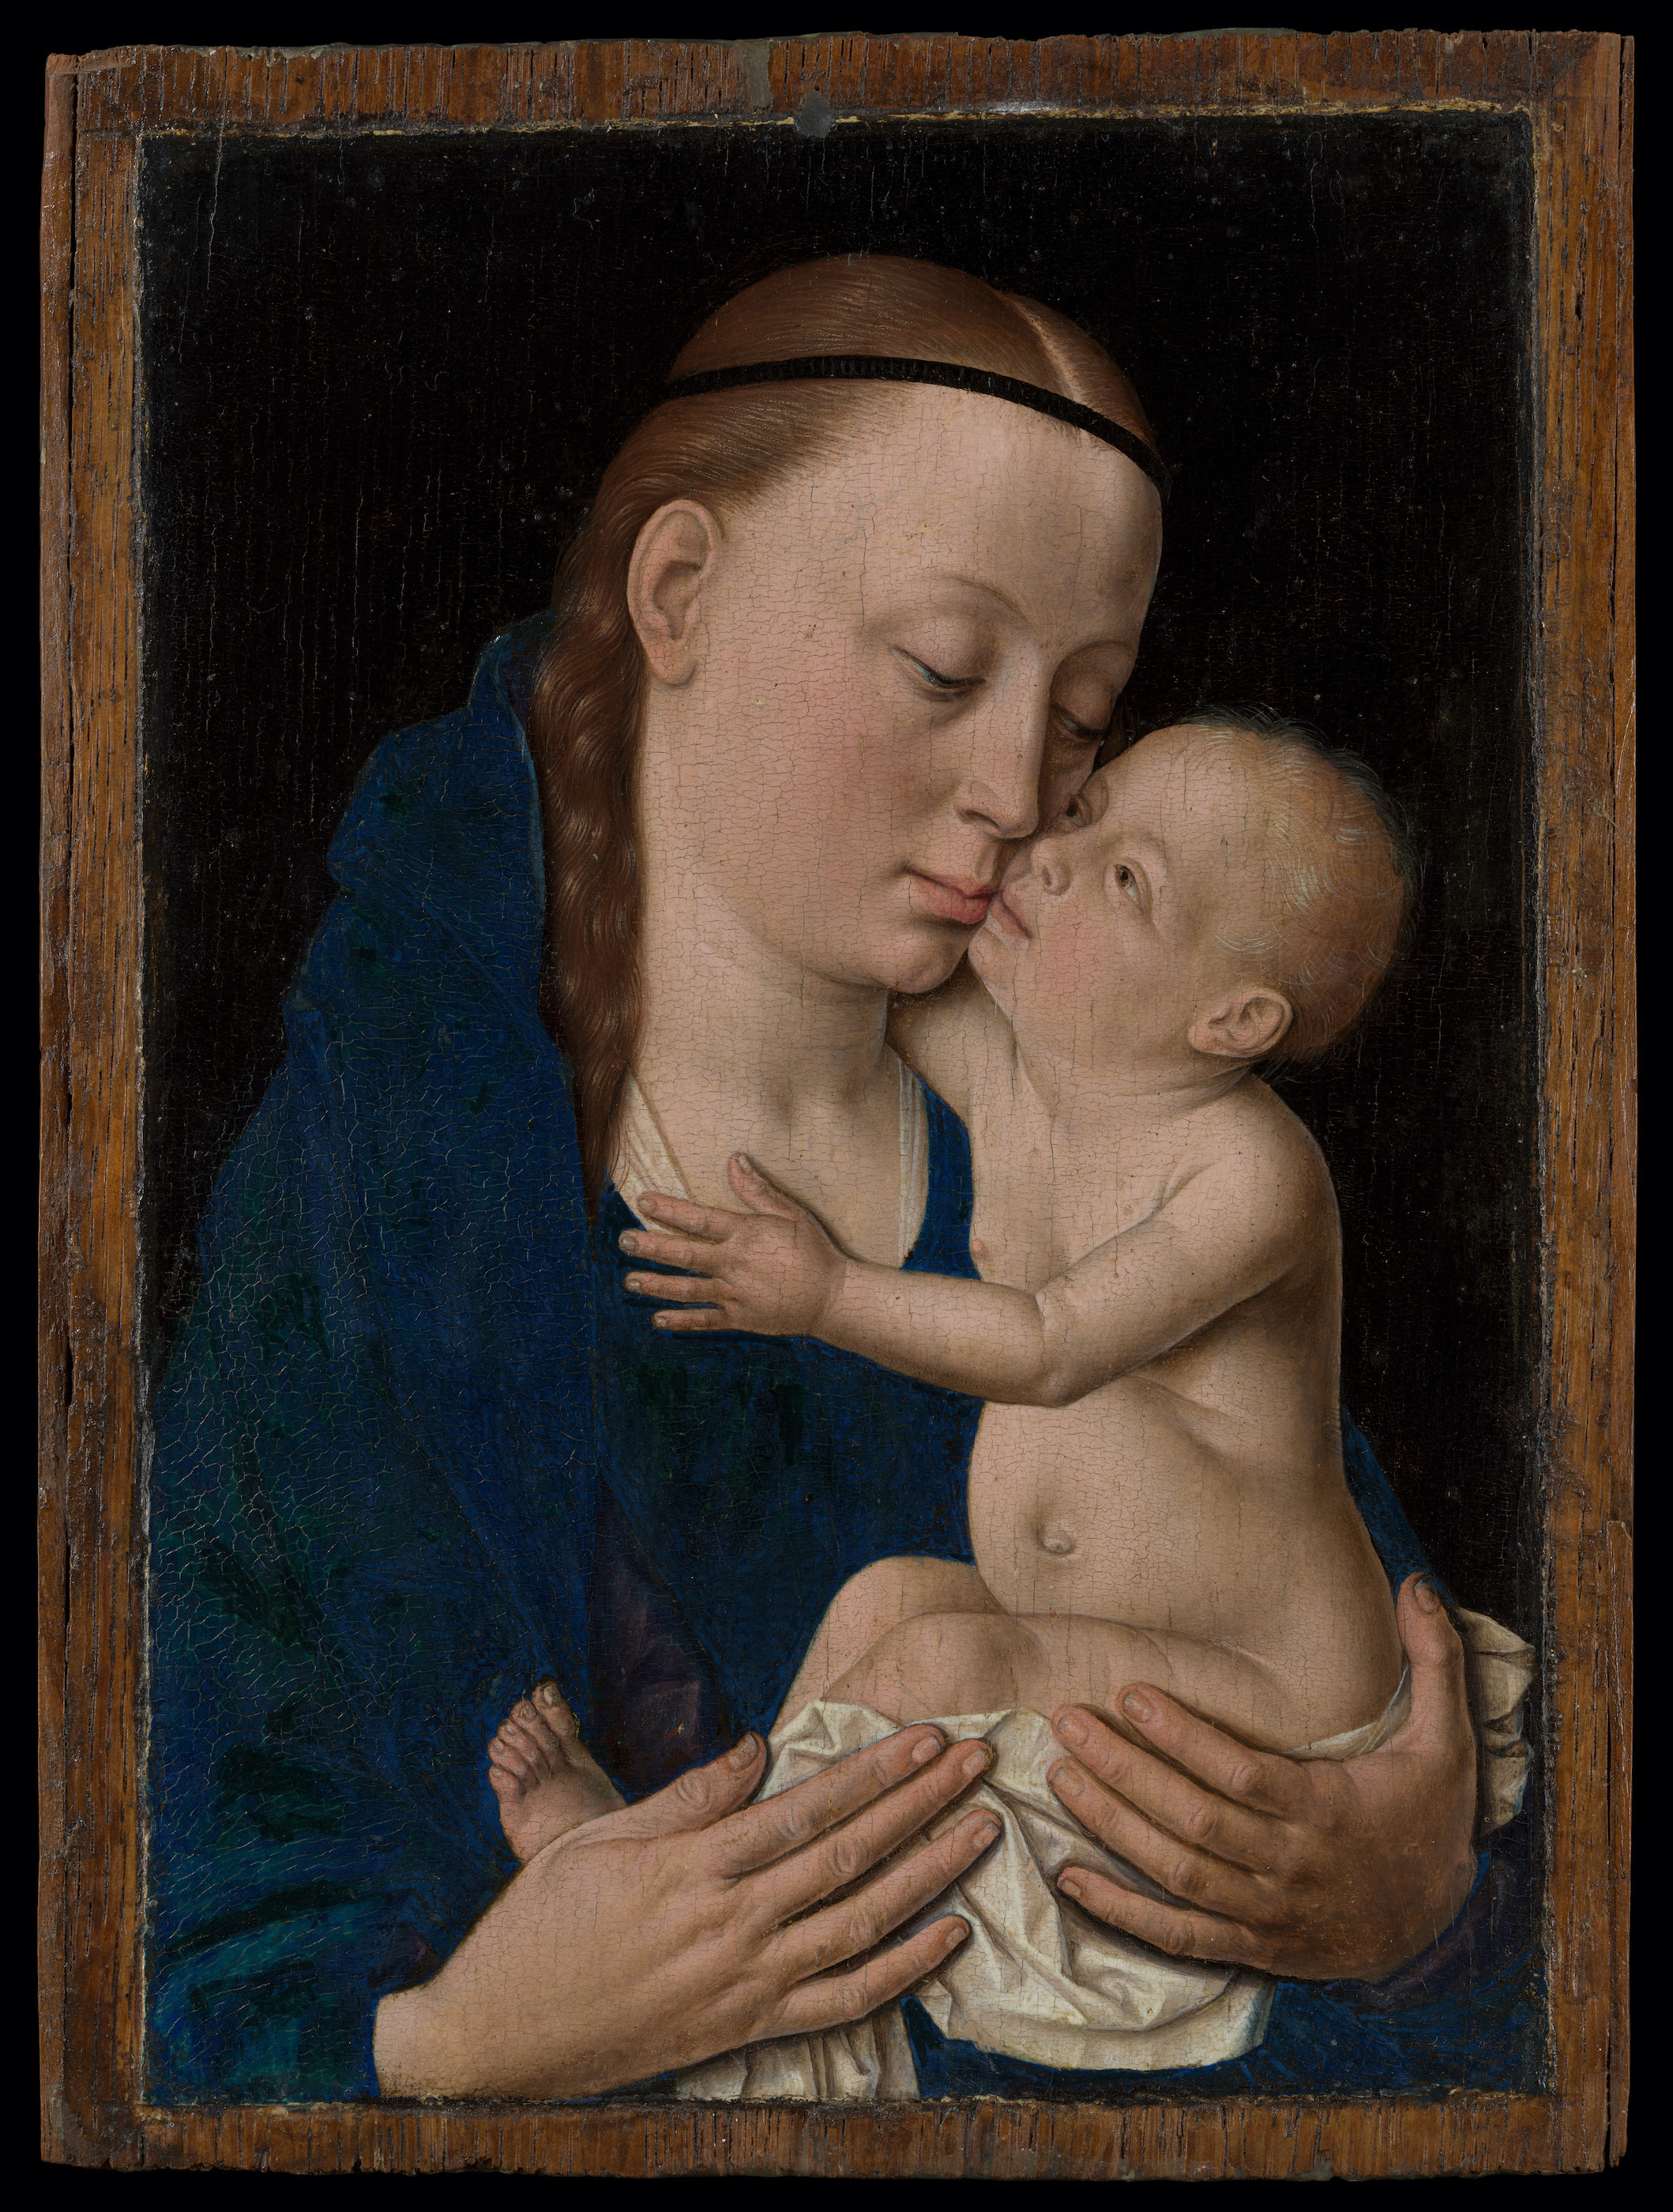 Dieric Bouts - born c. 1415 - 6 May 1475